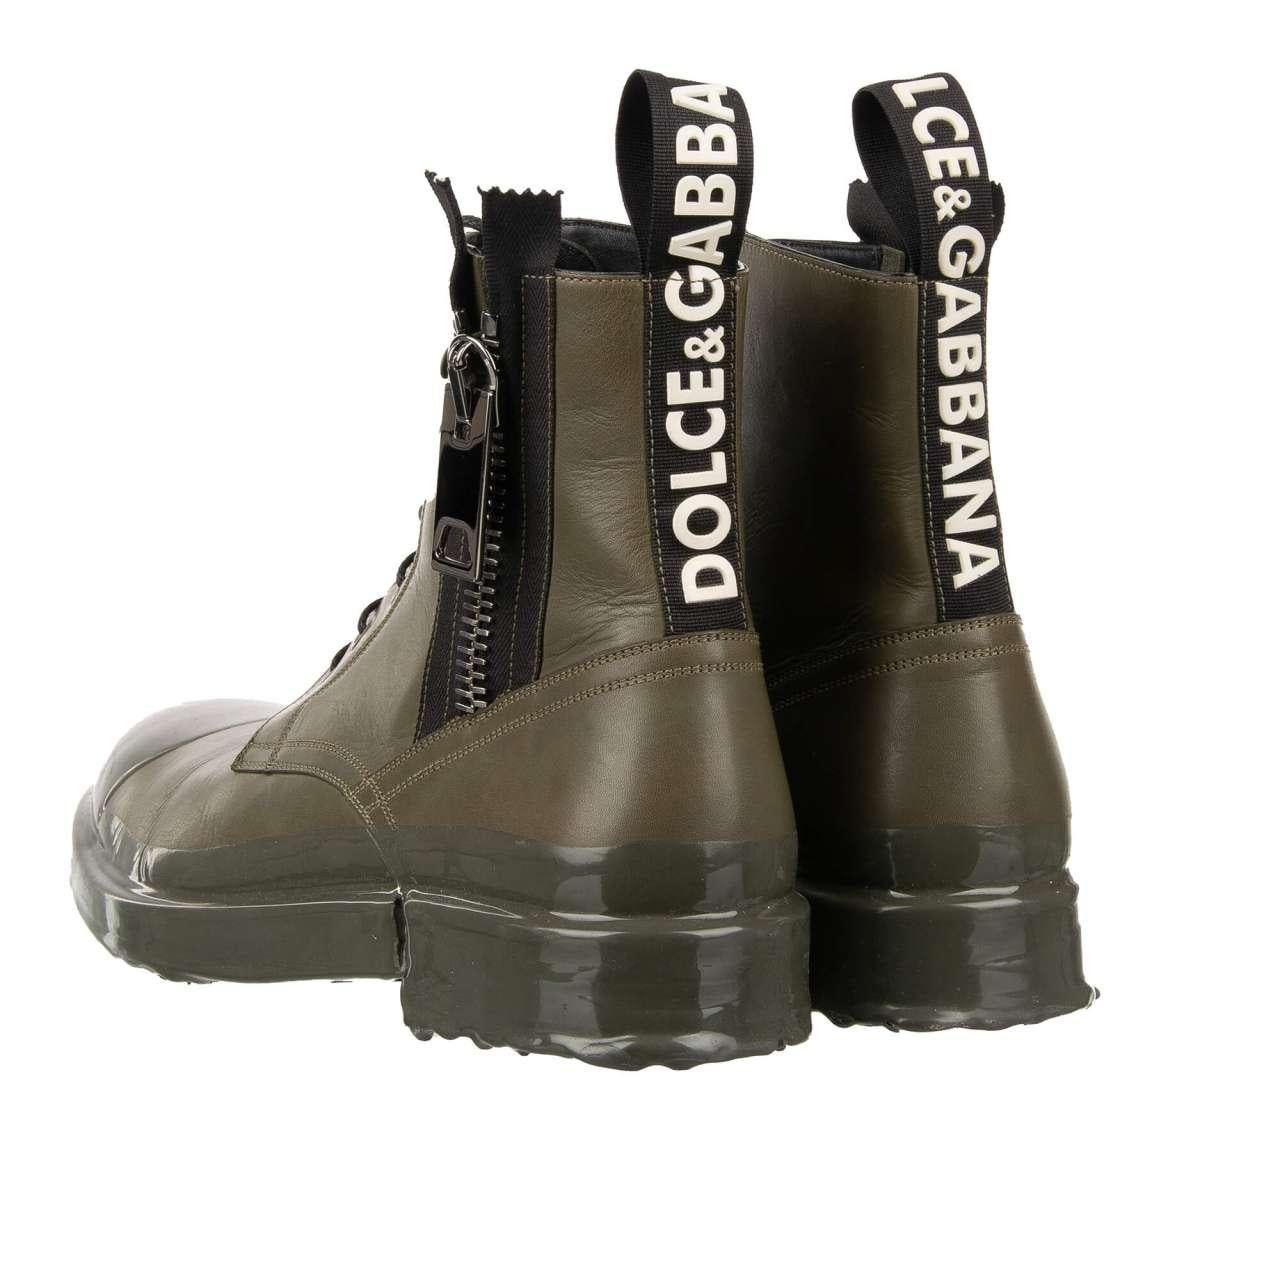 Dolce & Gabbana DG Logo Leather Ankle Boots FIRENZE Military Green EUR 44 In Excellent Condition For Sale In Erkrath, DE